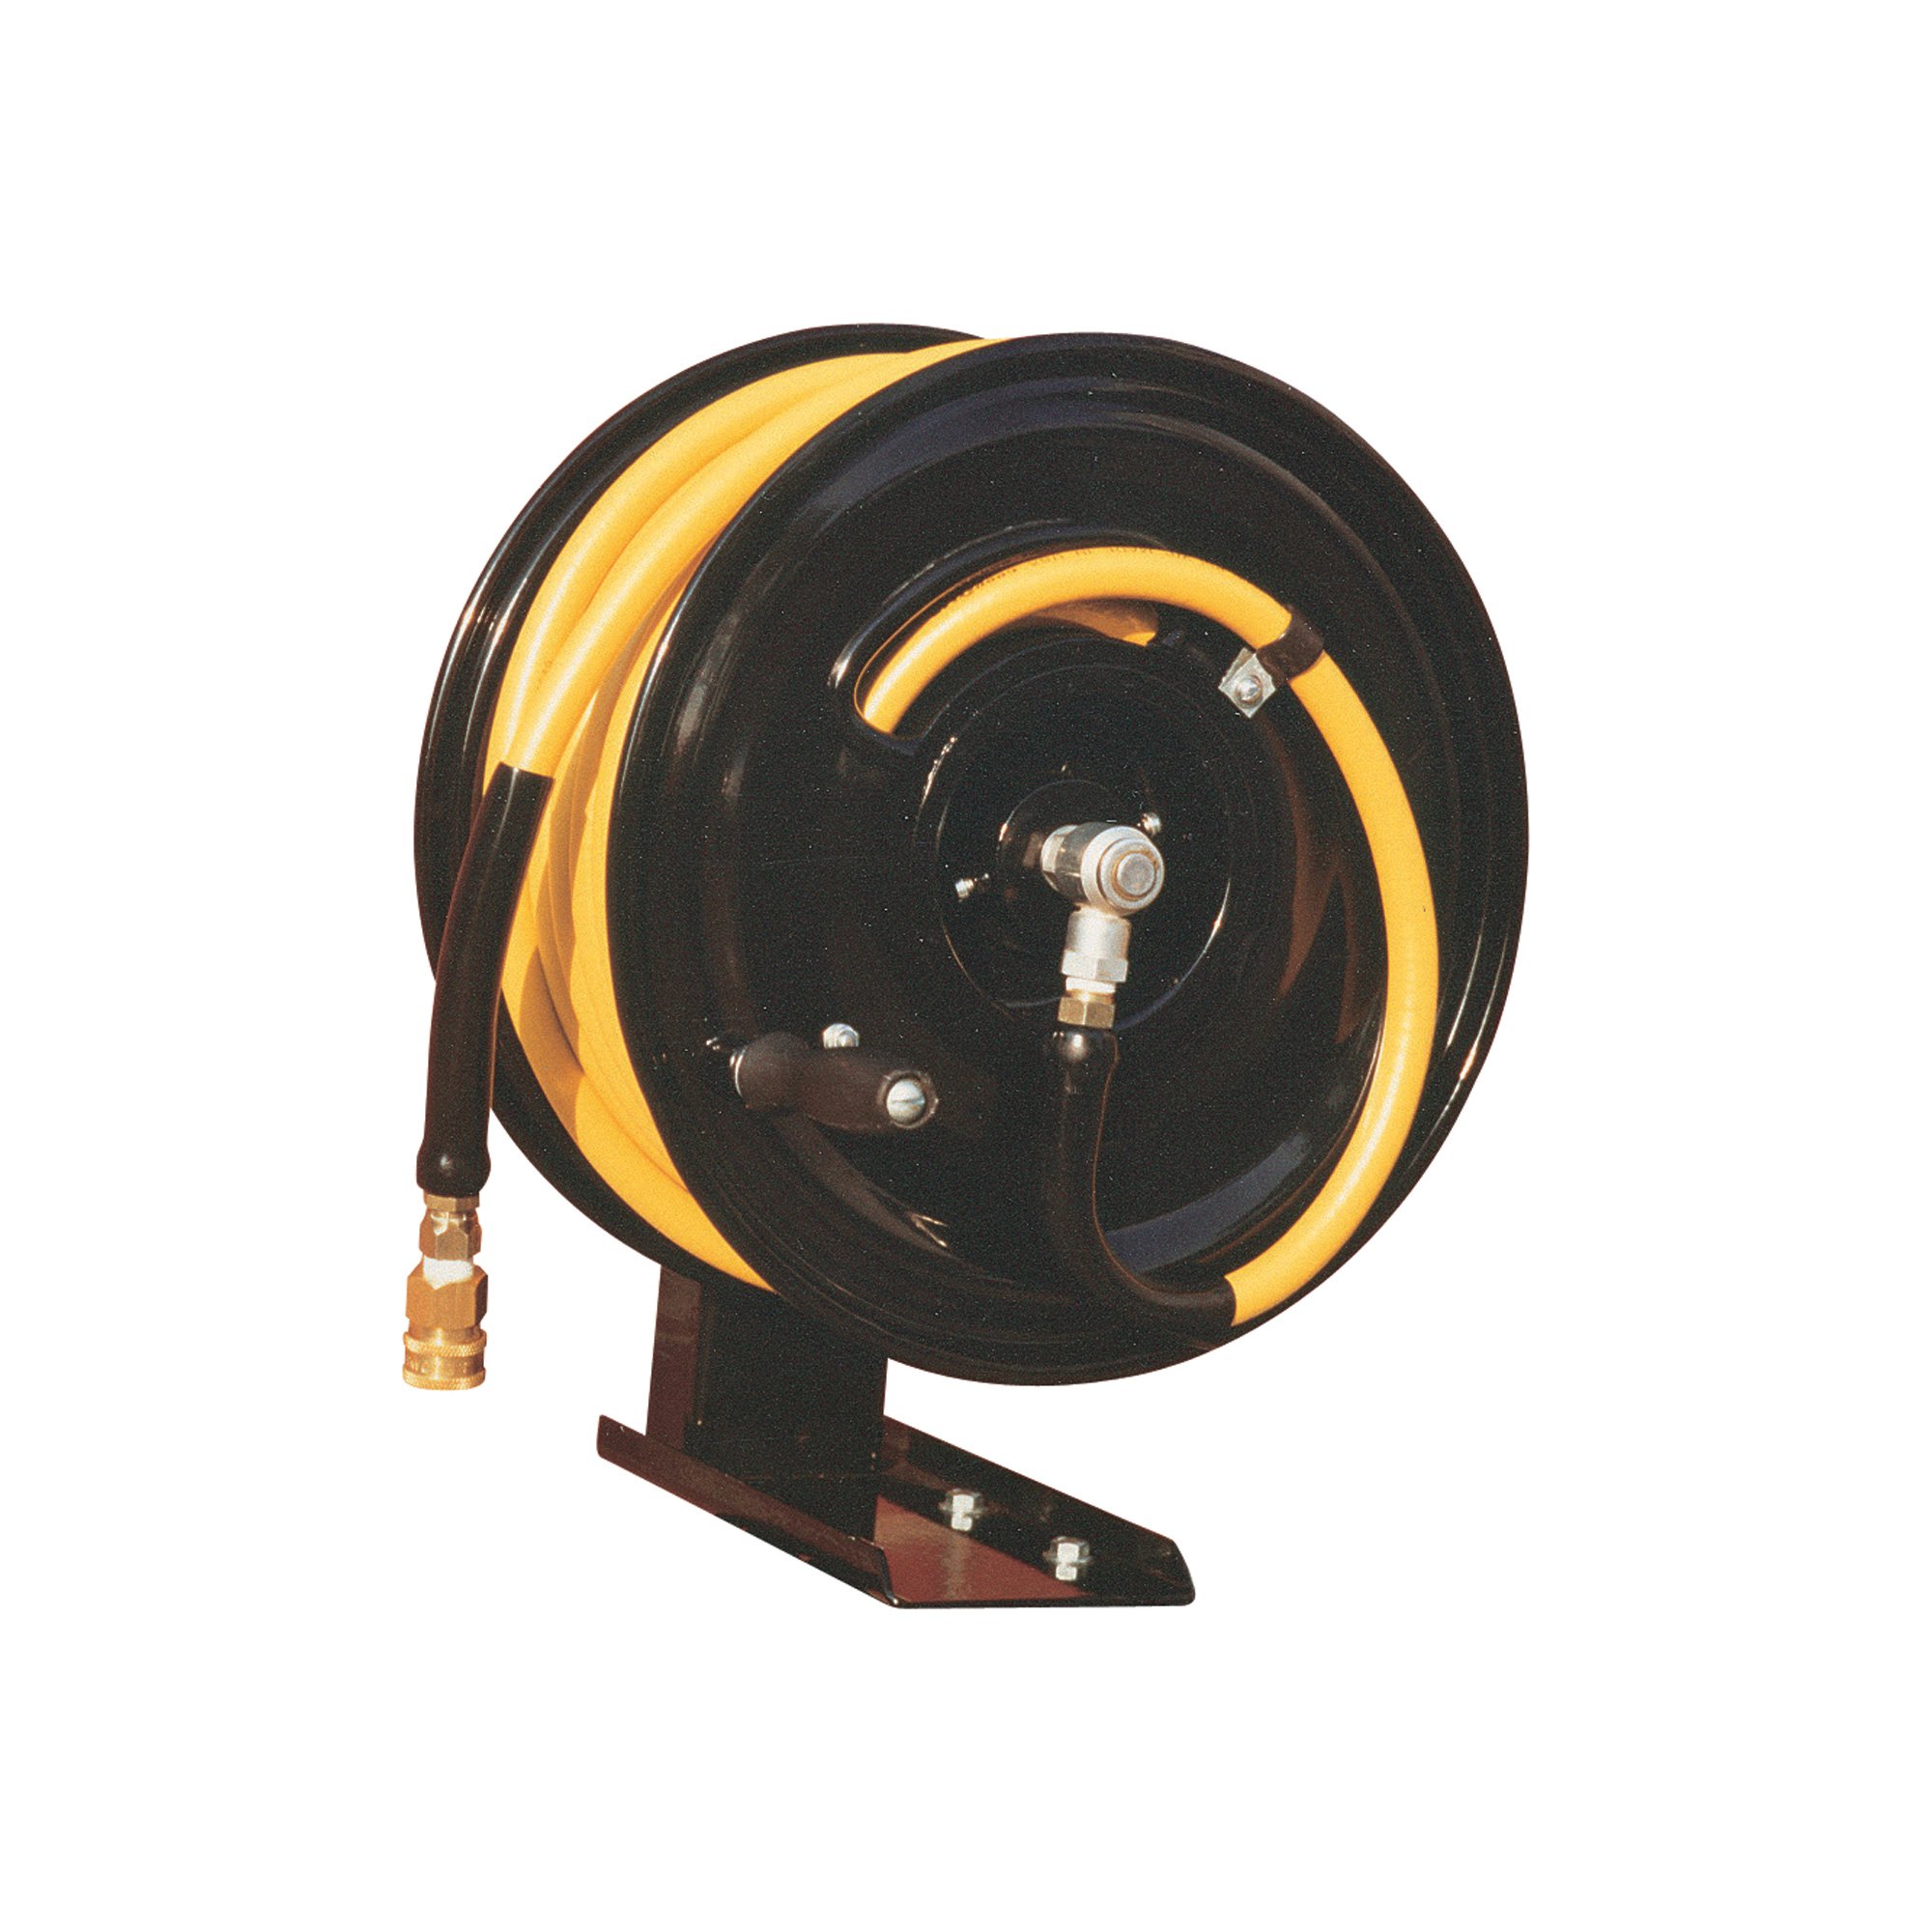 SP Systems Pressure Washer Hose Reel — Holds 3/8in x 150ft. Hose, 5000 PSI